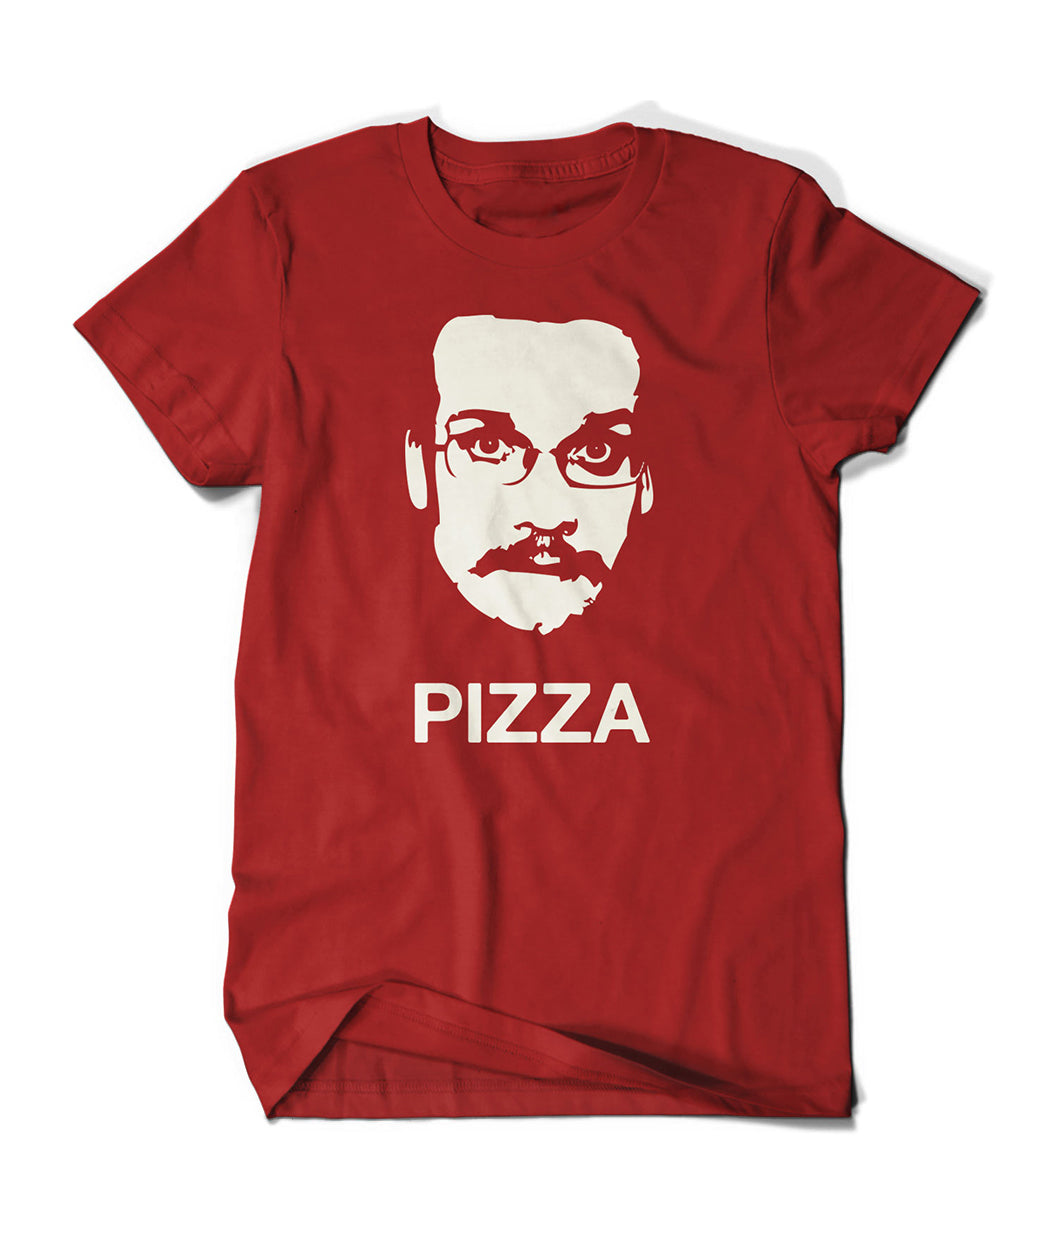 A red shirt with a white vector image of John Green with a mustache in the center and the word “Pizza” written below in white, sans serif font - from Vlogbrothers